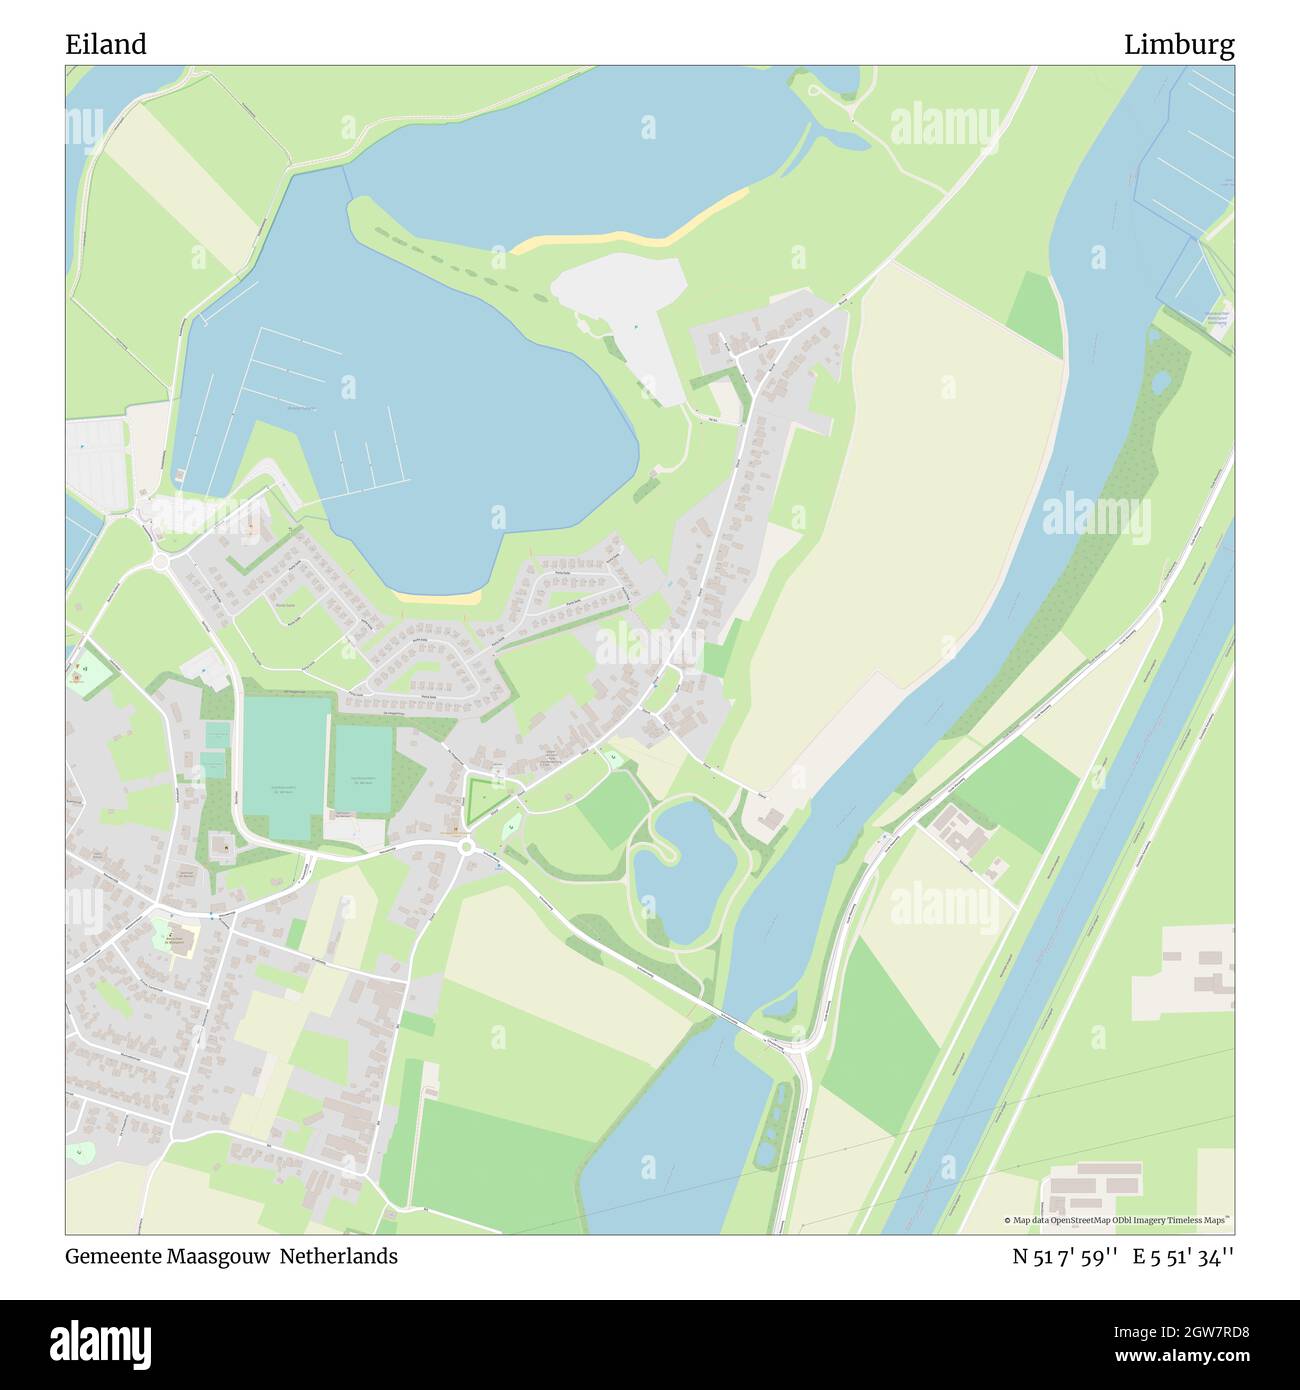 Eiland, Gemeente Maasgouw, Netherlands, Limburg, N 51 7' 59'', E 5 51' 34'', map, Timeless Map published in 2021. Travelers, explorers and adventurers like Florence Nightingale, David Livingstone, Ernest Shackleton, Lewis and Clark and Sherlock Holmes relied on maps to plan travels to the world's most remote corners, Timeless Maps is mapping most locations on the globe, showing the achievement of great dreams Stock Photo